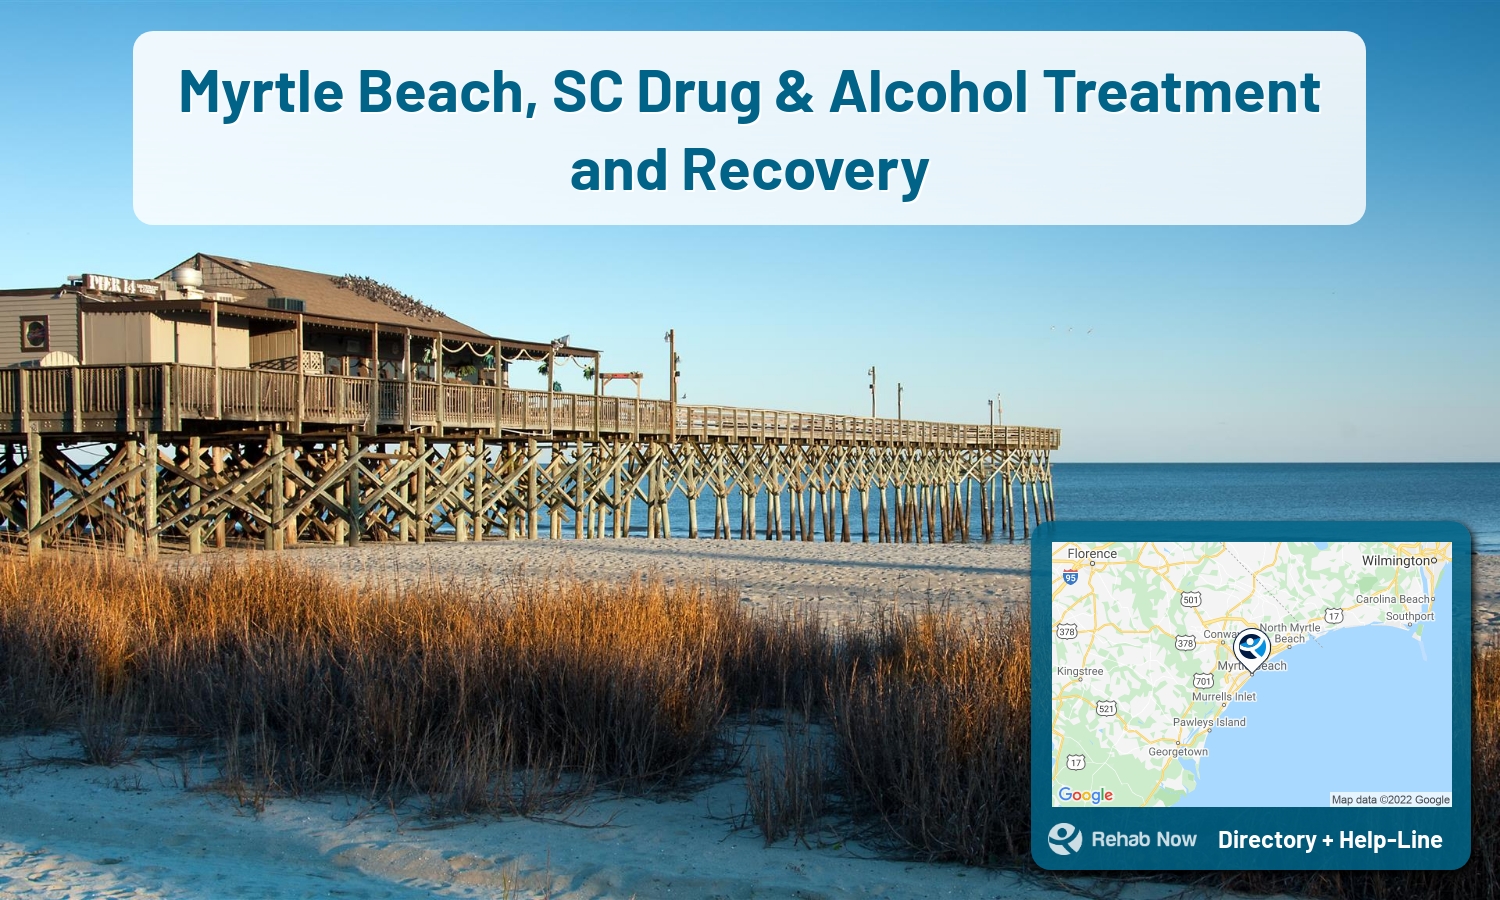 Myrtle Beach, SC Treatment Centers. Find drug rehab in Myrtle Beach, South Carolina, or detox and treatment programs. Get the right help now!